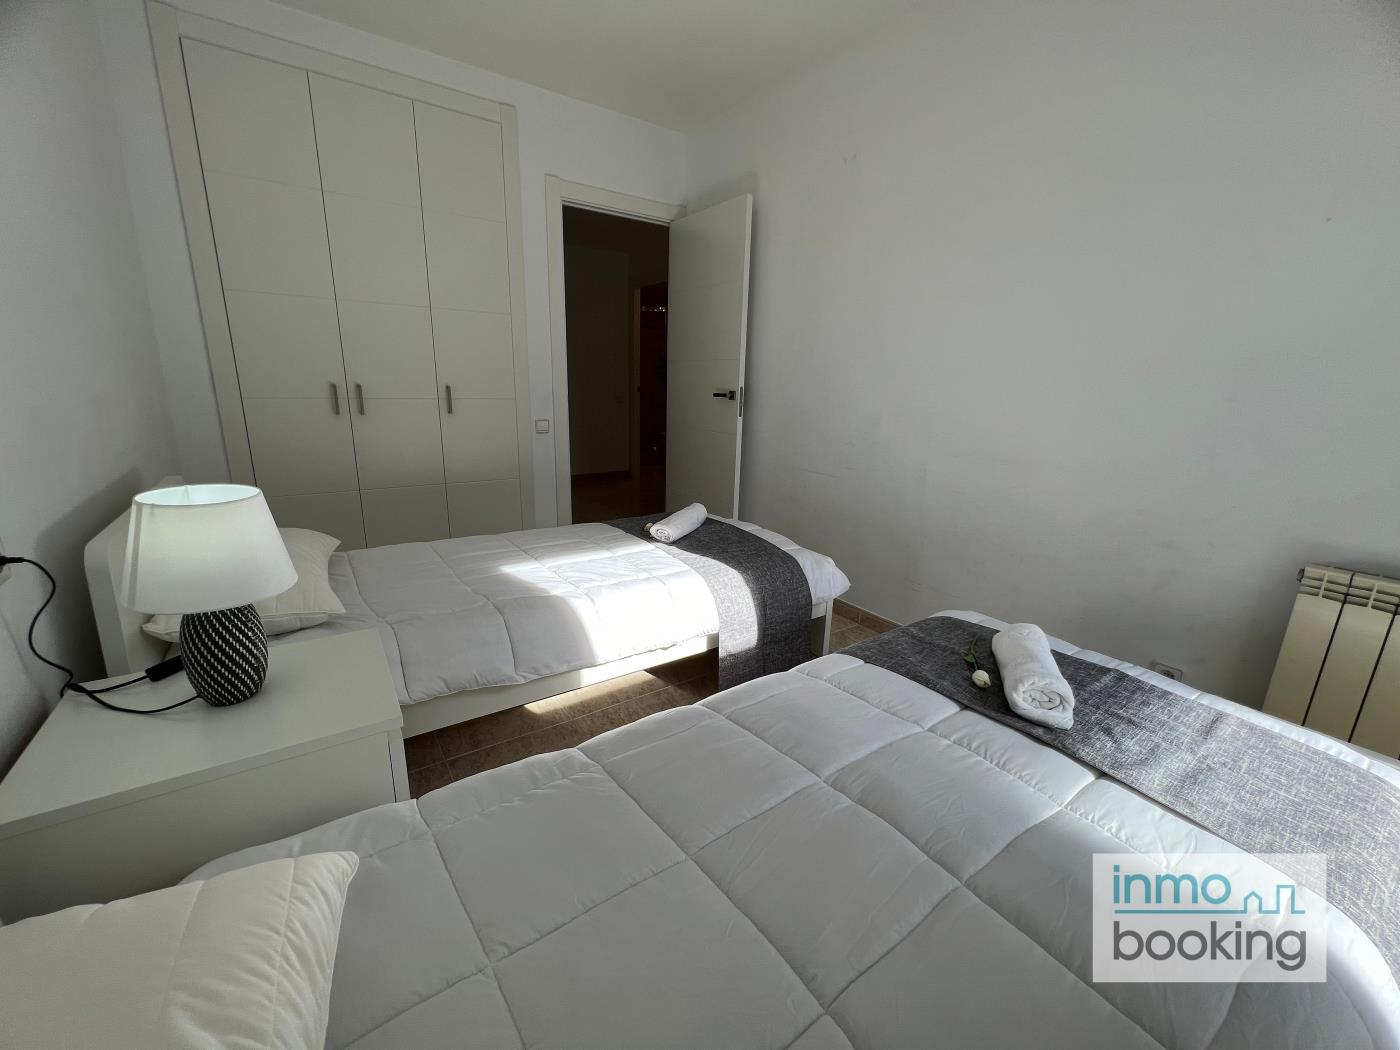 Inmobooking Villa Elvira, with swimming pool and free parking in salou